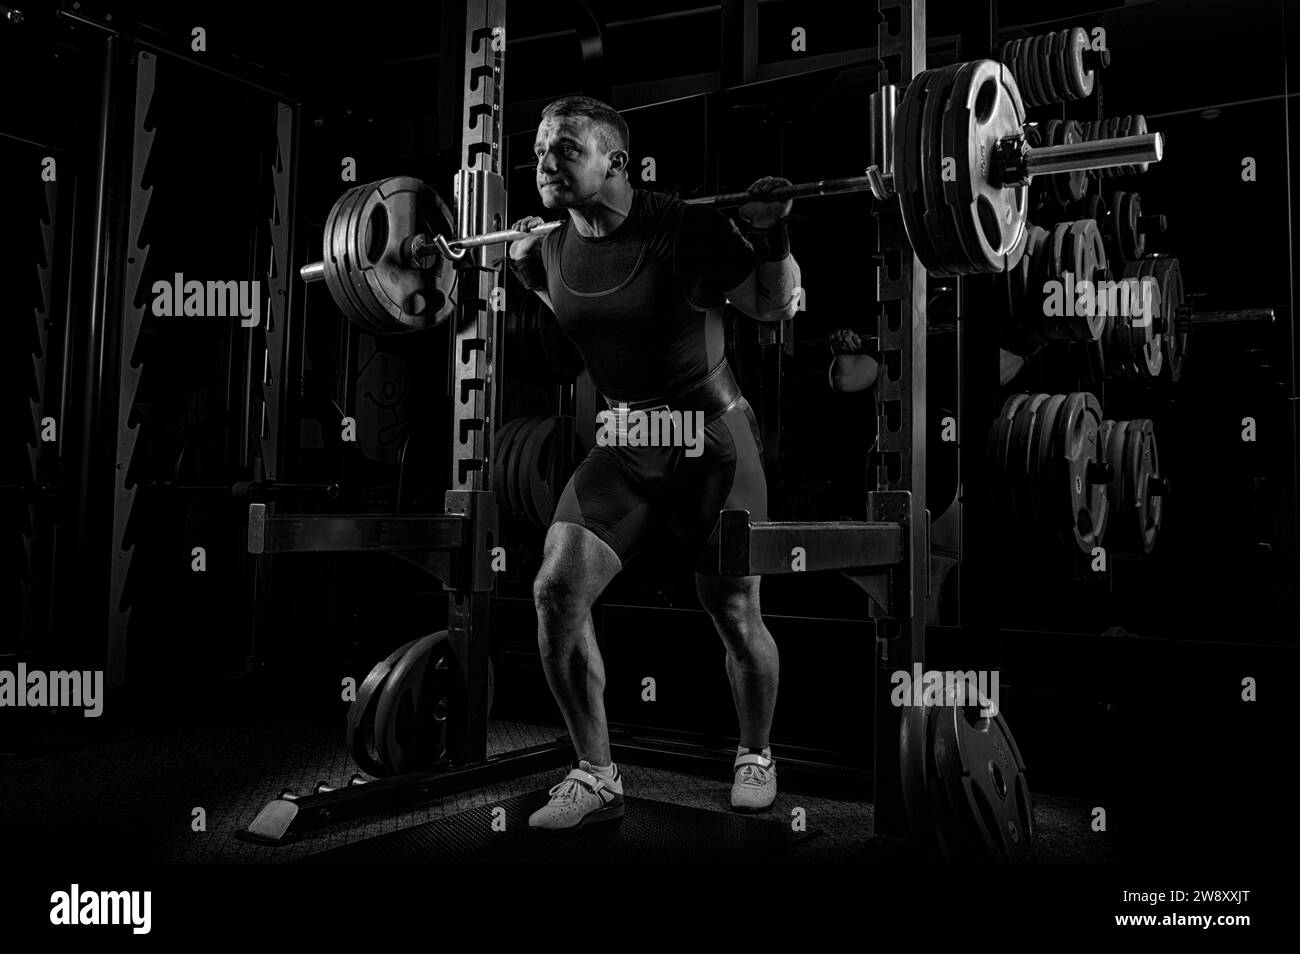 The weightlifter is preparing to lift a very heavy barbell. He exhales breathlessly and strains as much as possible before performing the exercise Stock Photo